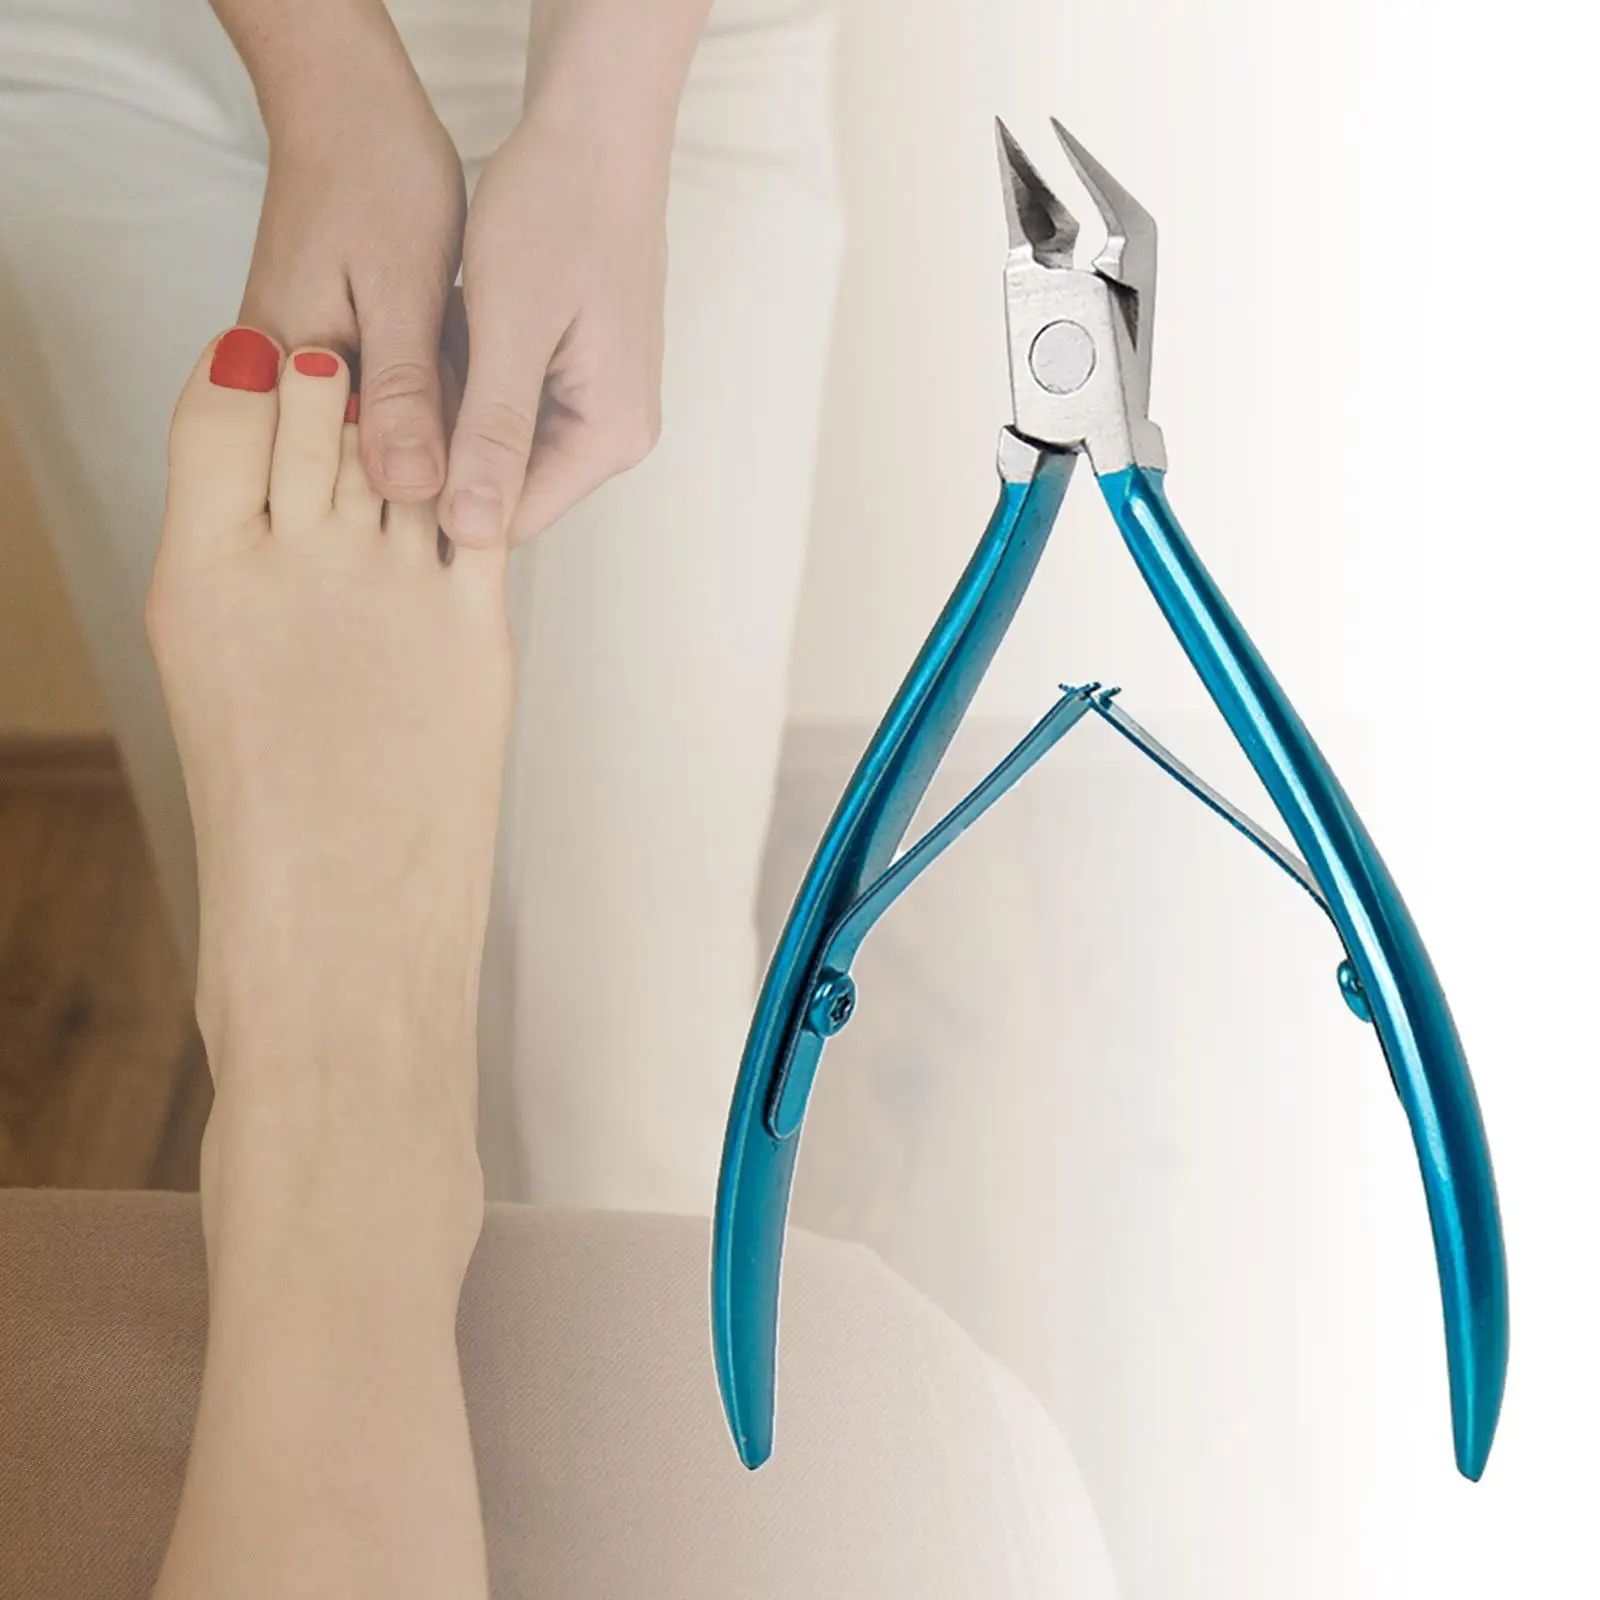 Professional Toenail clippers Stainless Steel Toenails Cutter for Home Thick Nails